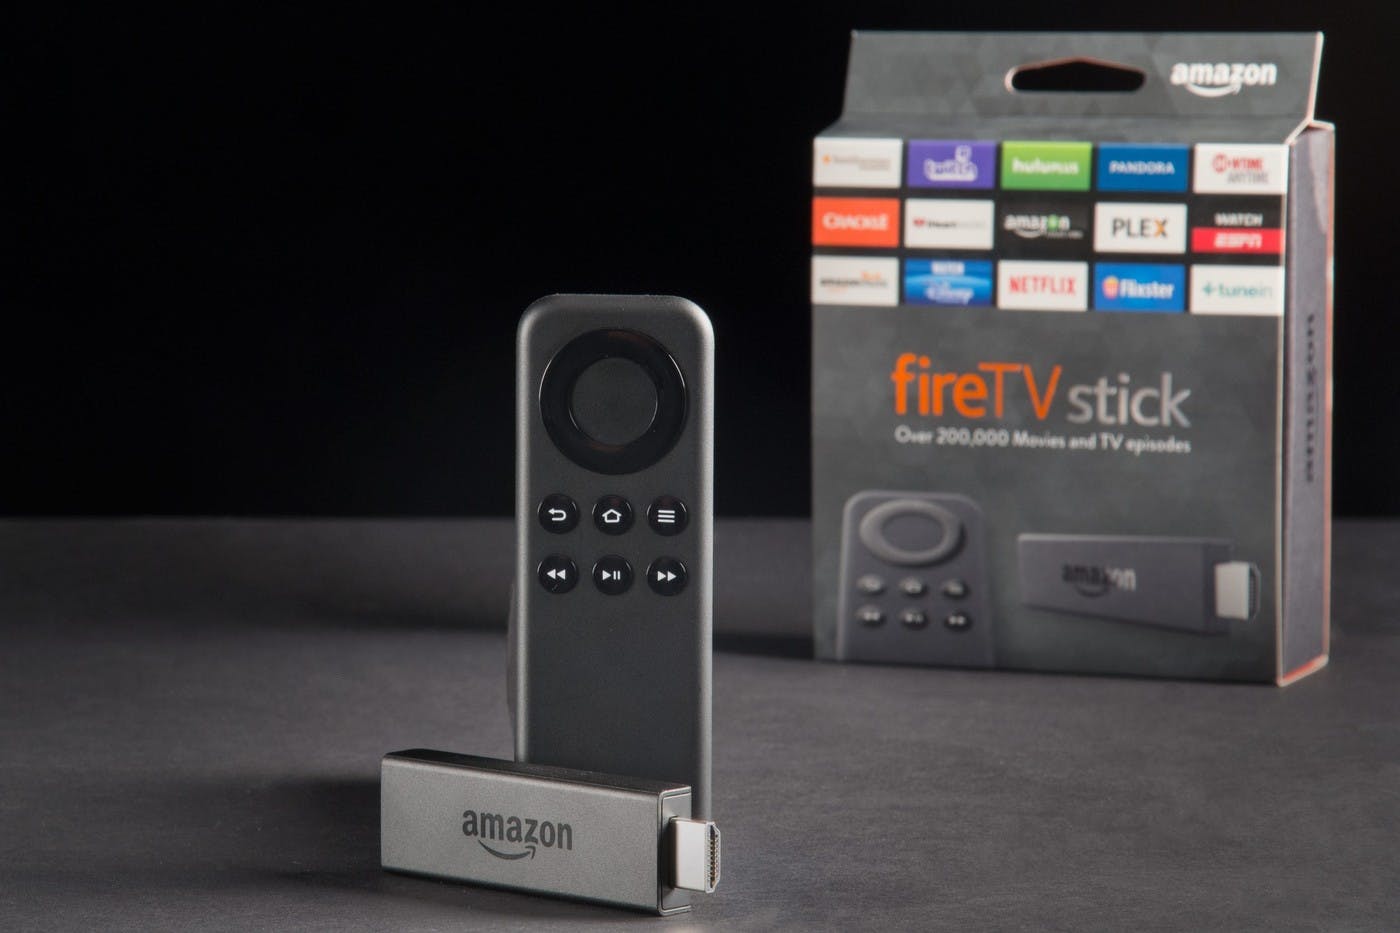 Android TV Box VS Fire TV Stick: Which is better